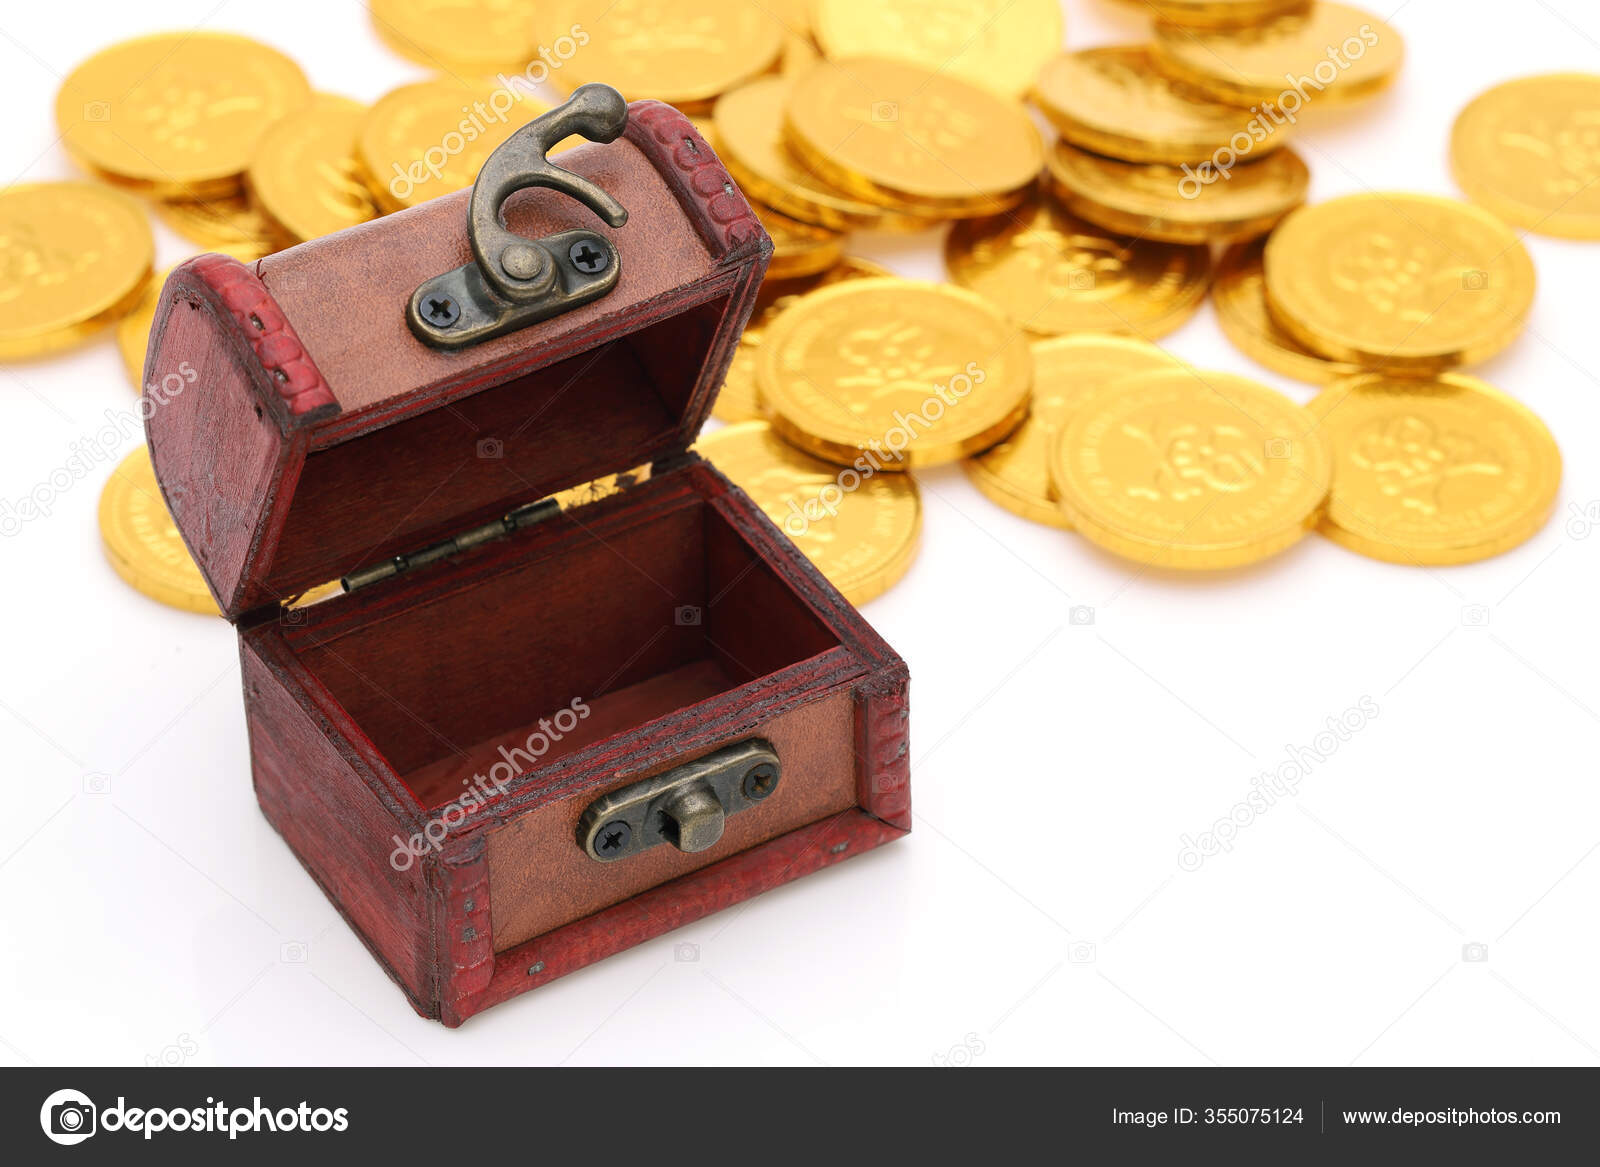 illustration of opened treasure chest full of gold coins and